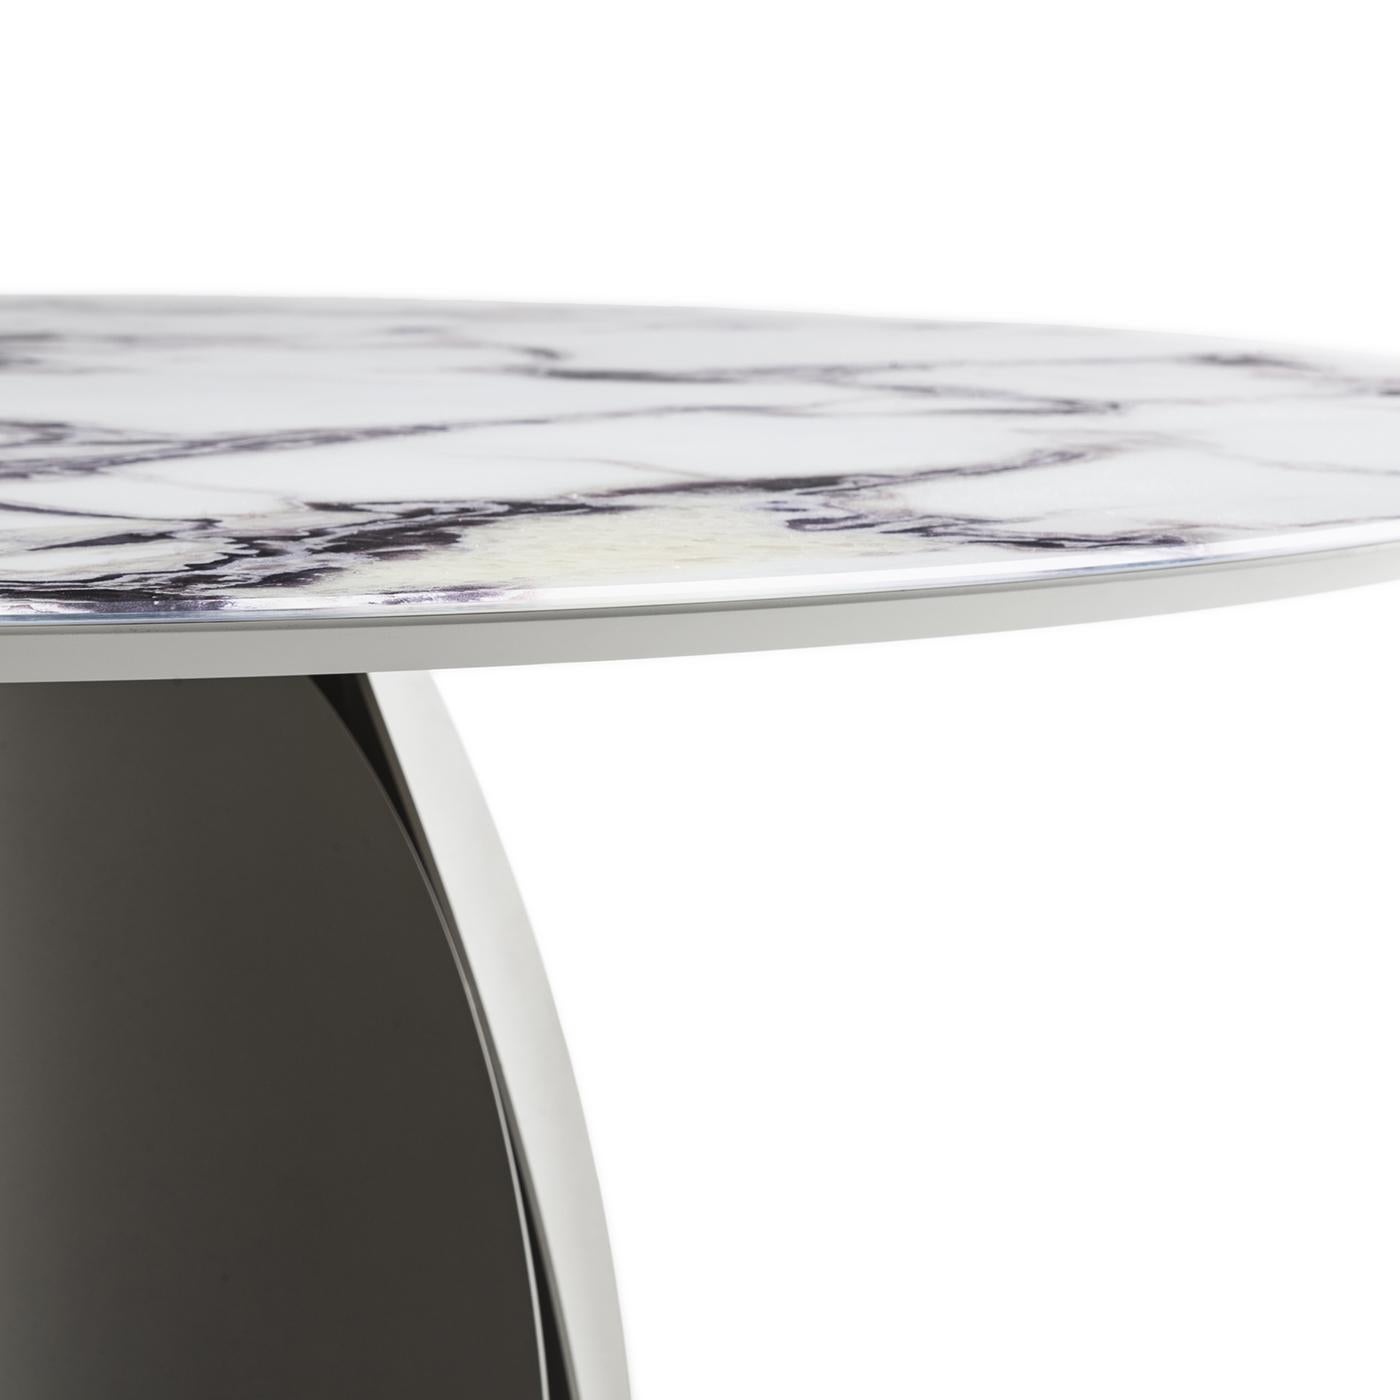 Showcasing the faithful print of Trinity marble decorating its tempered glass tabletop, this table celebrates nature through sophisticated modern detailing. The sculptural structure in rolled metal - finished in champagne surging epoxy-powder